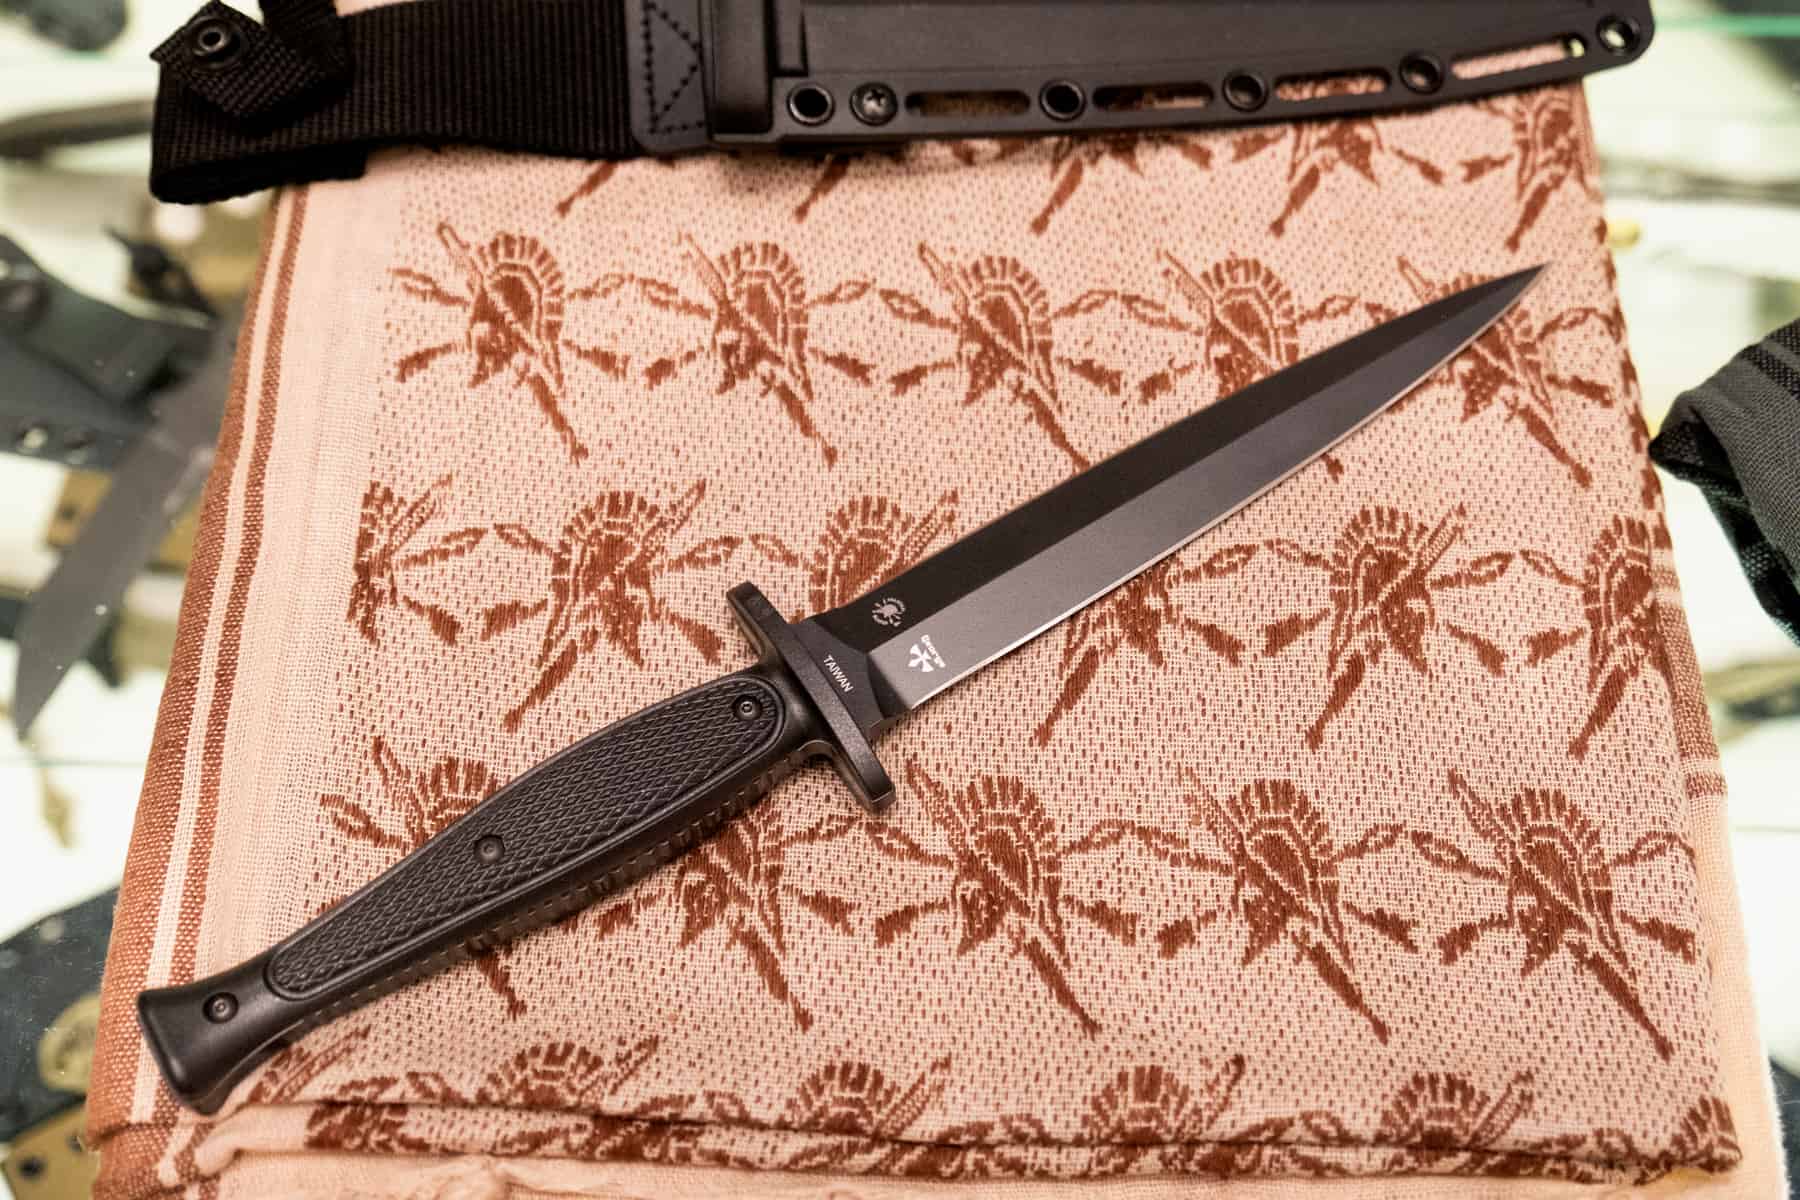 The George Raider from Spartan Blades is a Fairbairn Sykes style tactical knife.